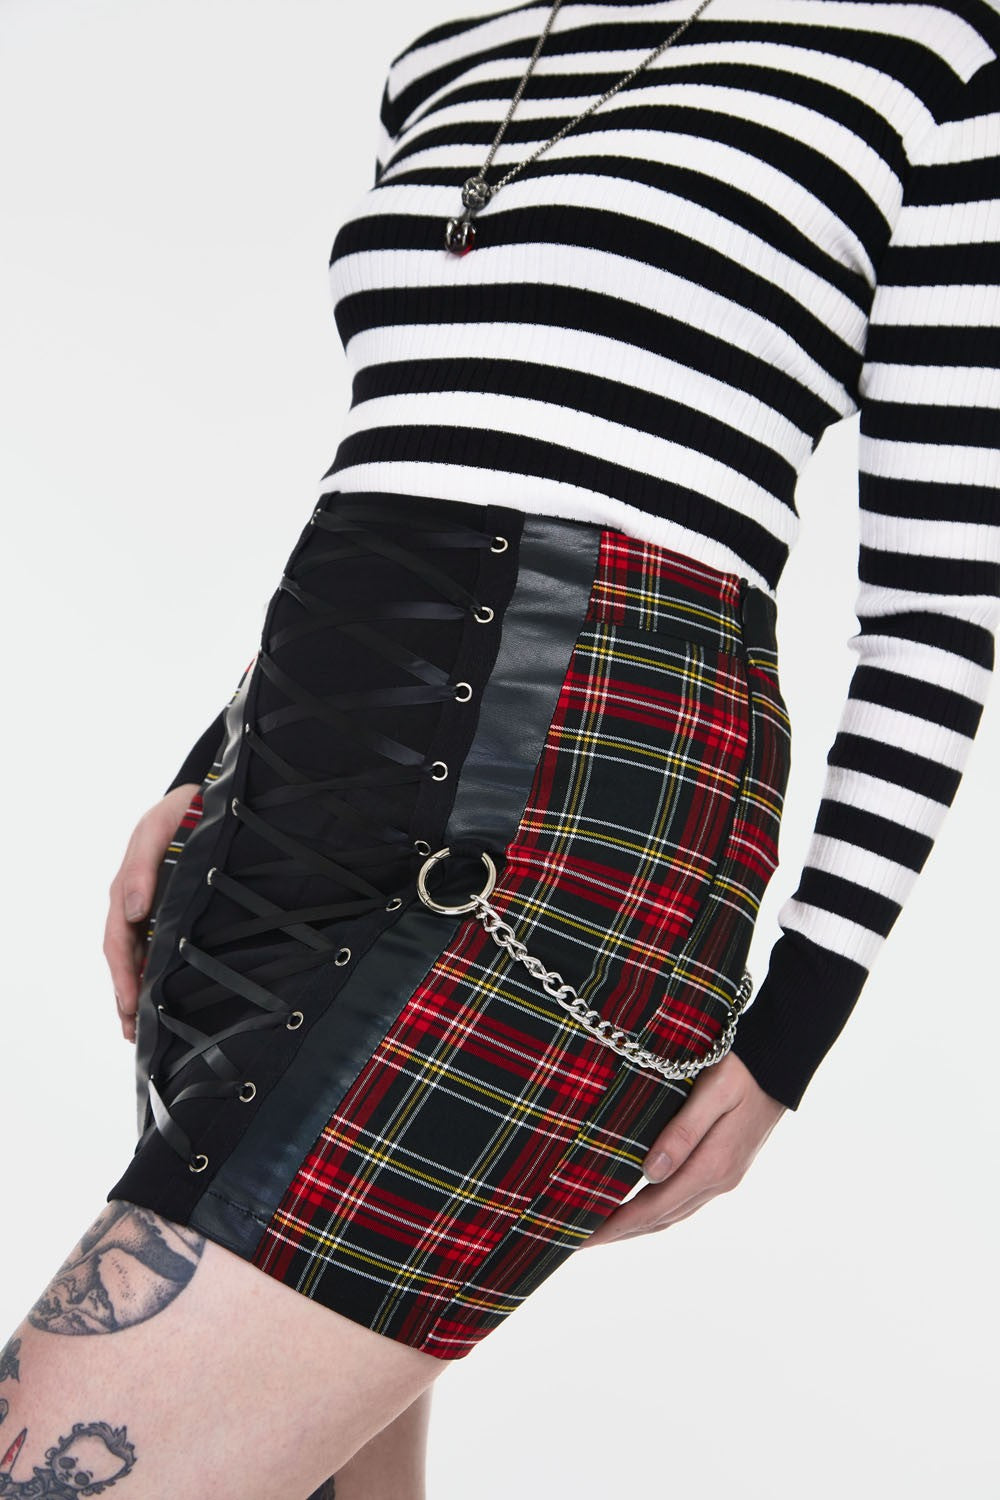 The front and left side of the Tartan Tube Skirt with Lace-Up Front Panel.